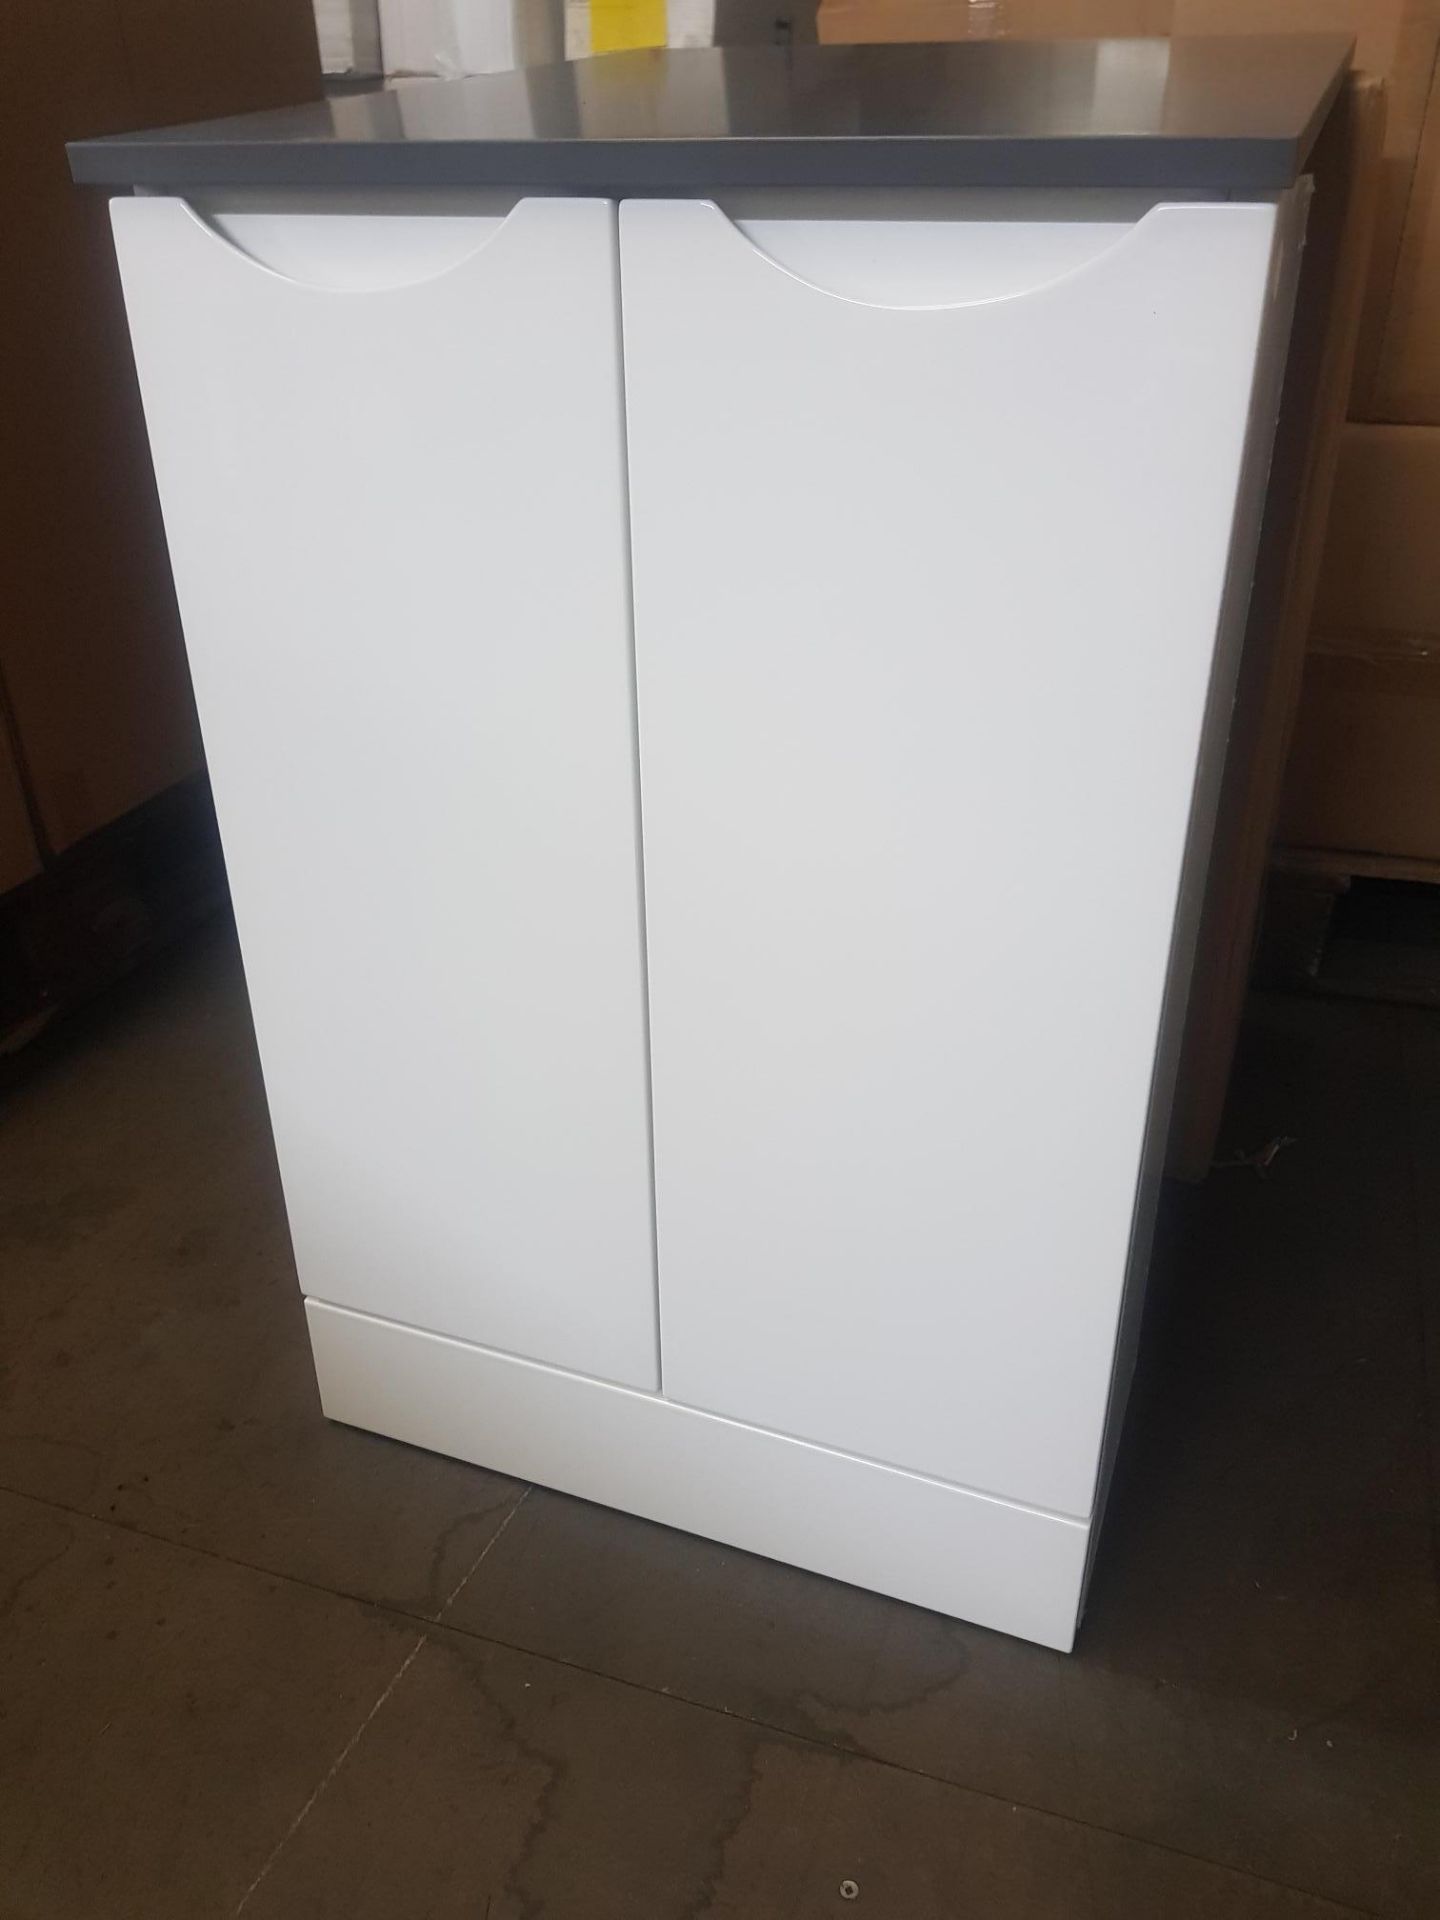 Boston 490 x 45 x 730mm modern double soft close door vanity unit in gloss white. Includes dark grey - Image 2 of 4